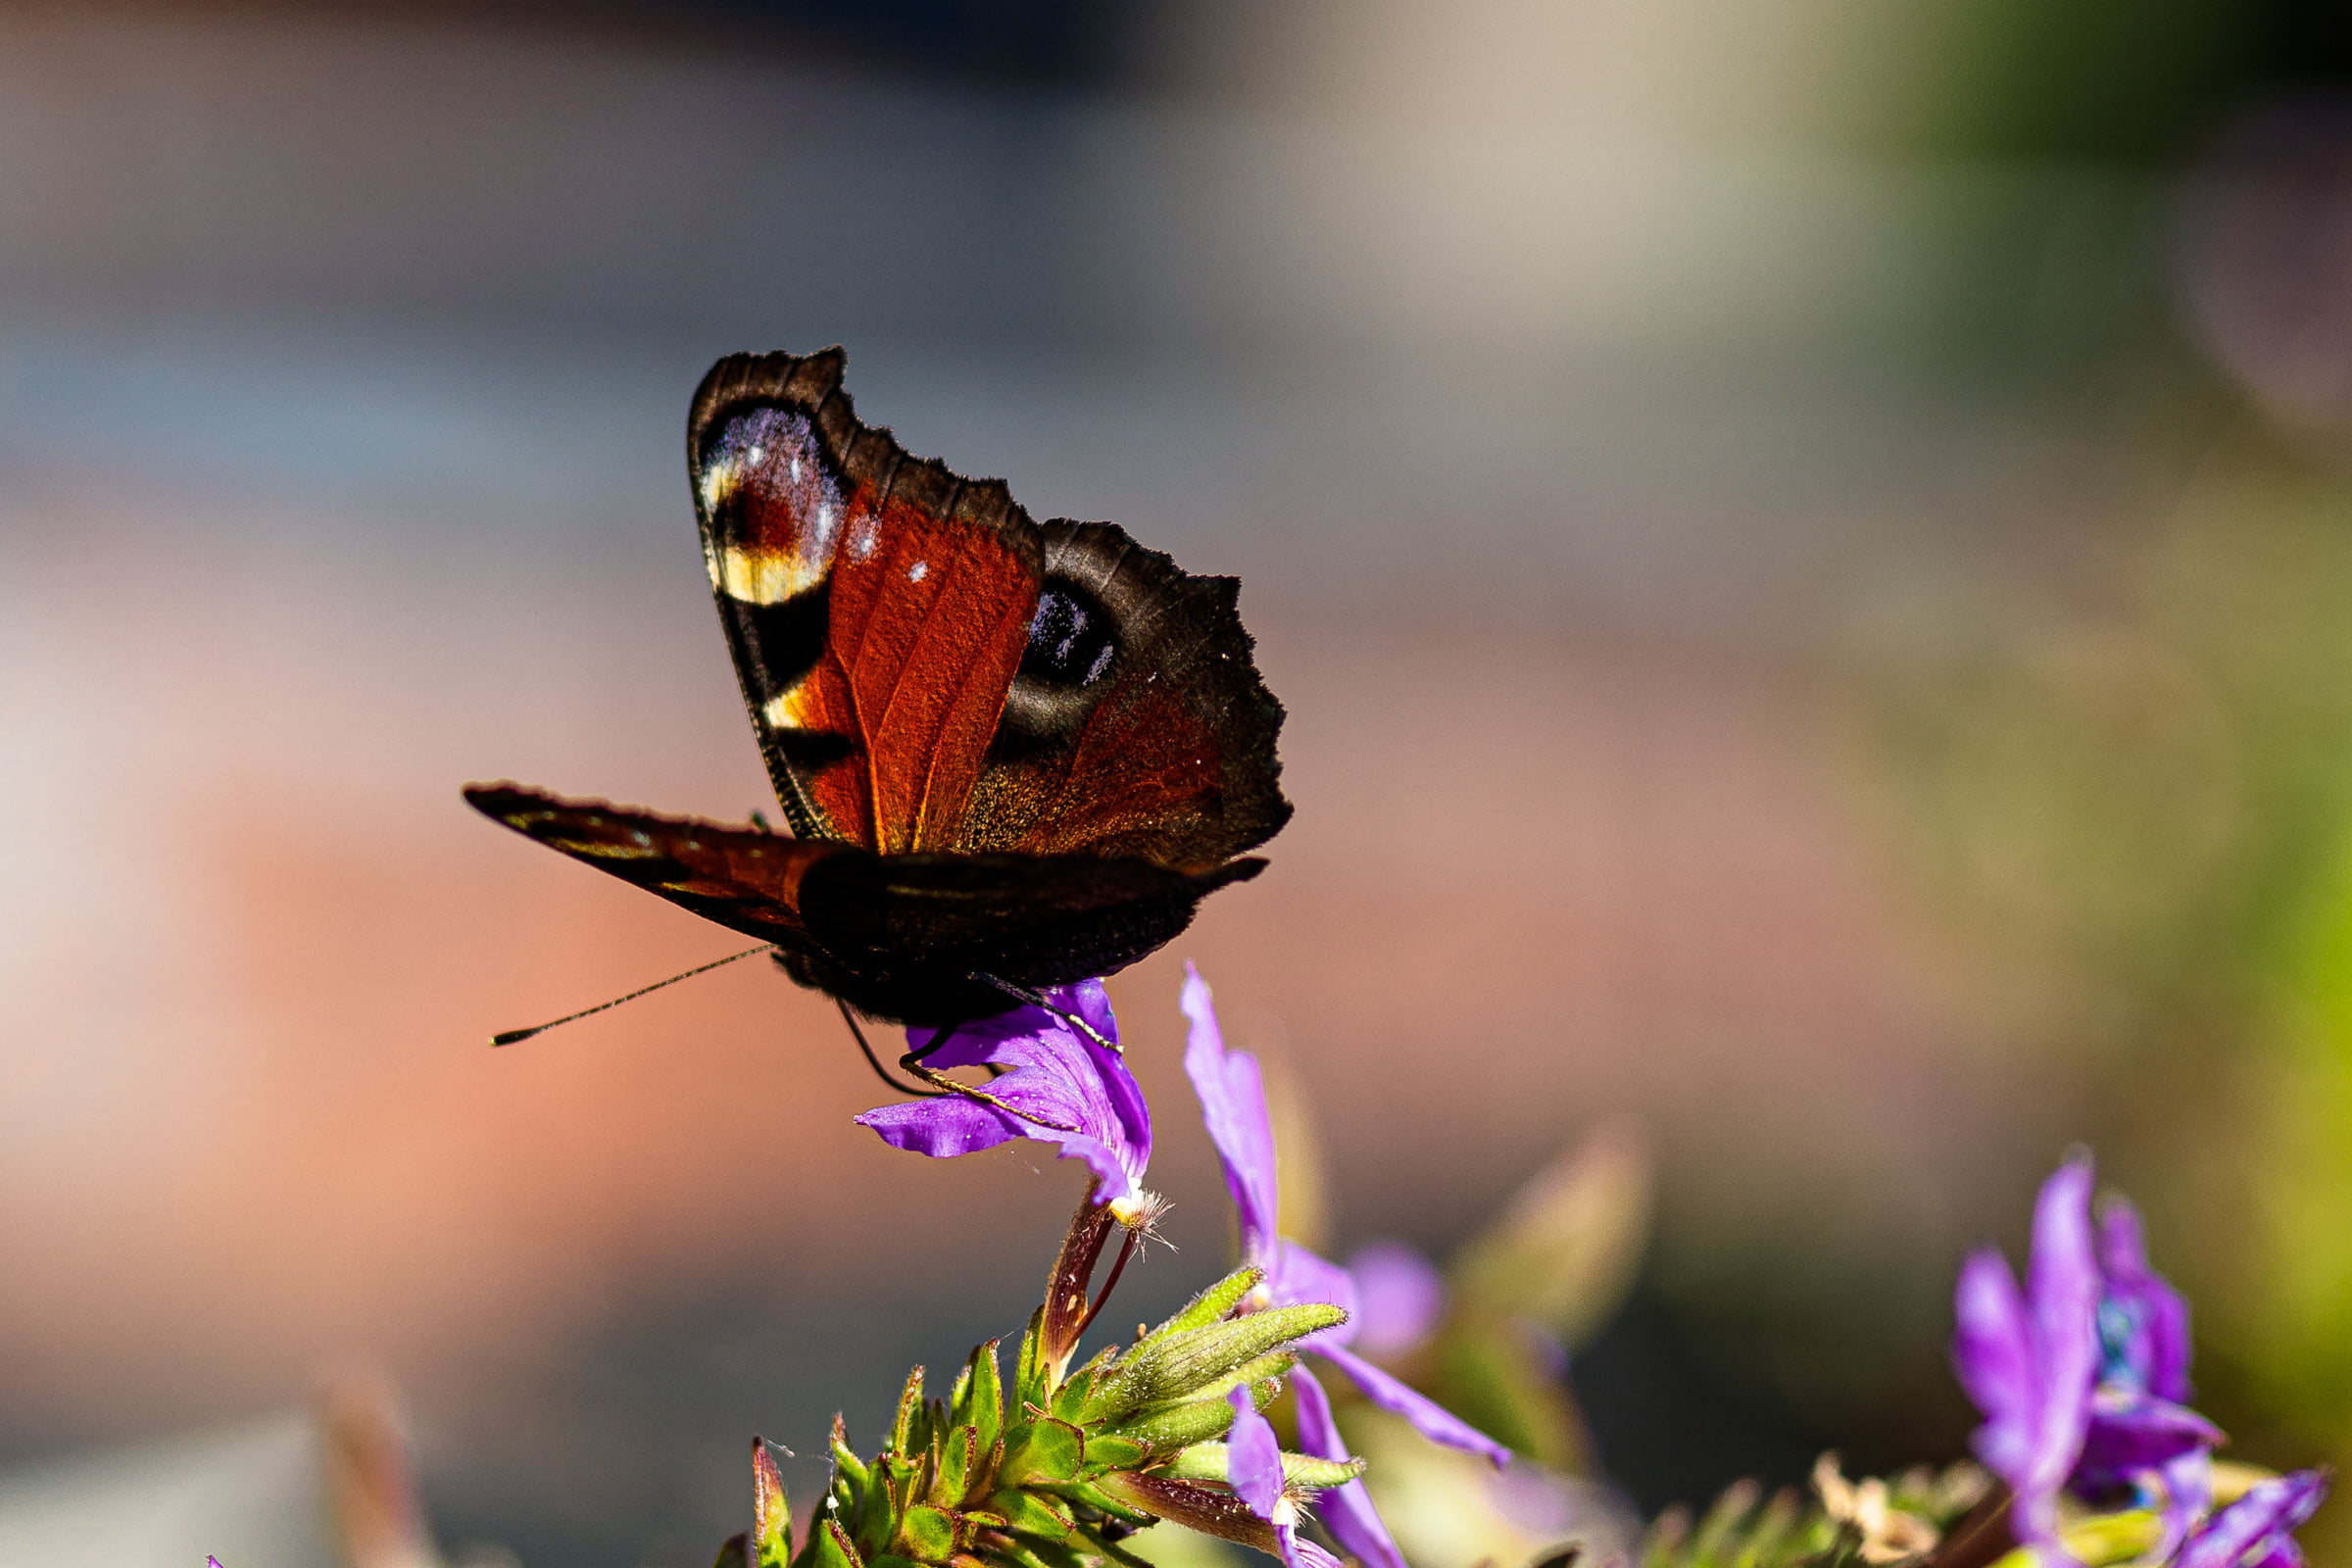 A butterfly sitting on a flower, showing it's orange right wing with markings.